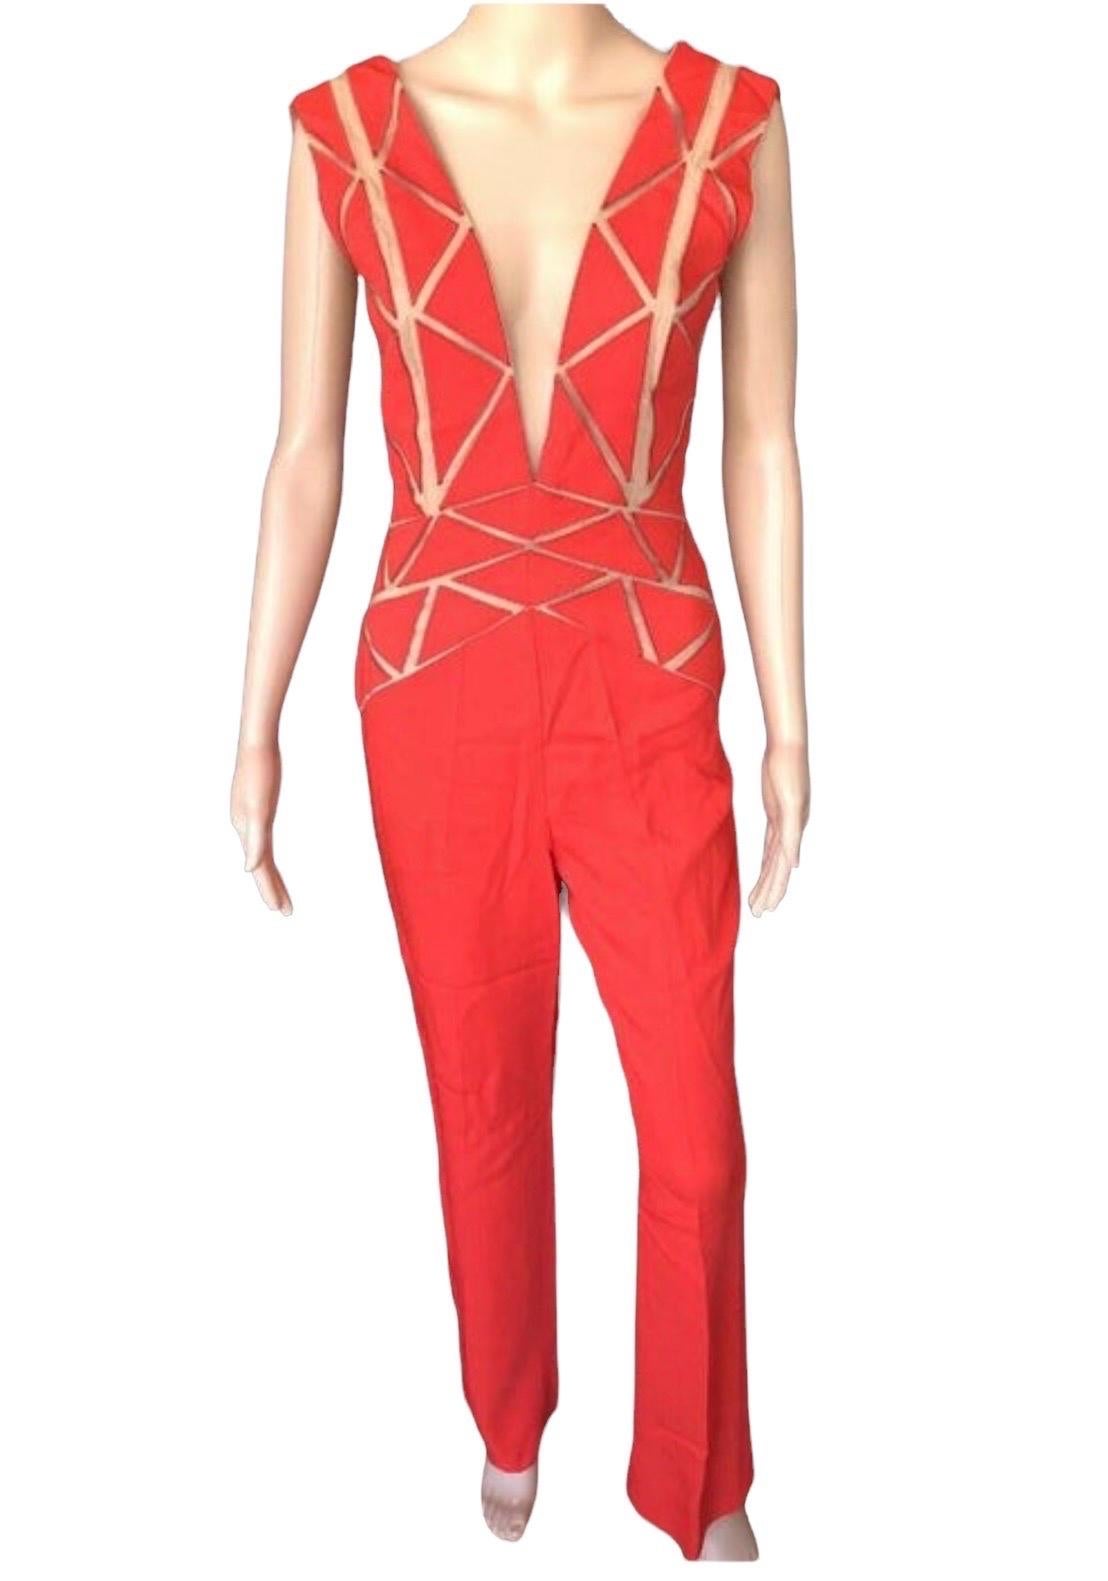 Zuhair Murad Resort 2015 Runway Plunged Sheer Tulle Cutout Red Romper Jumpsuit IT 40 

PLEASE NOTE THIS LISTING IS FOR THE JUMPSUIT IN THE RED COLOR.

Zuhair Murad sleeveless high-rise wide-leg jumpsuit featuring illusion V neckline, tulle inserts,